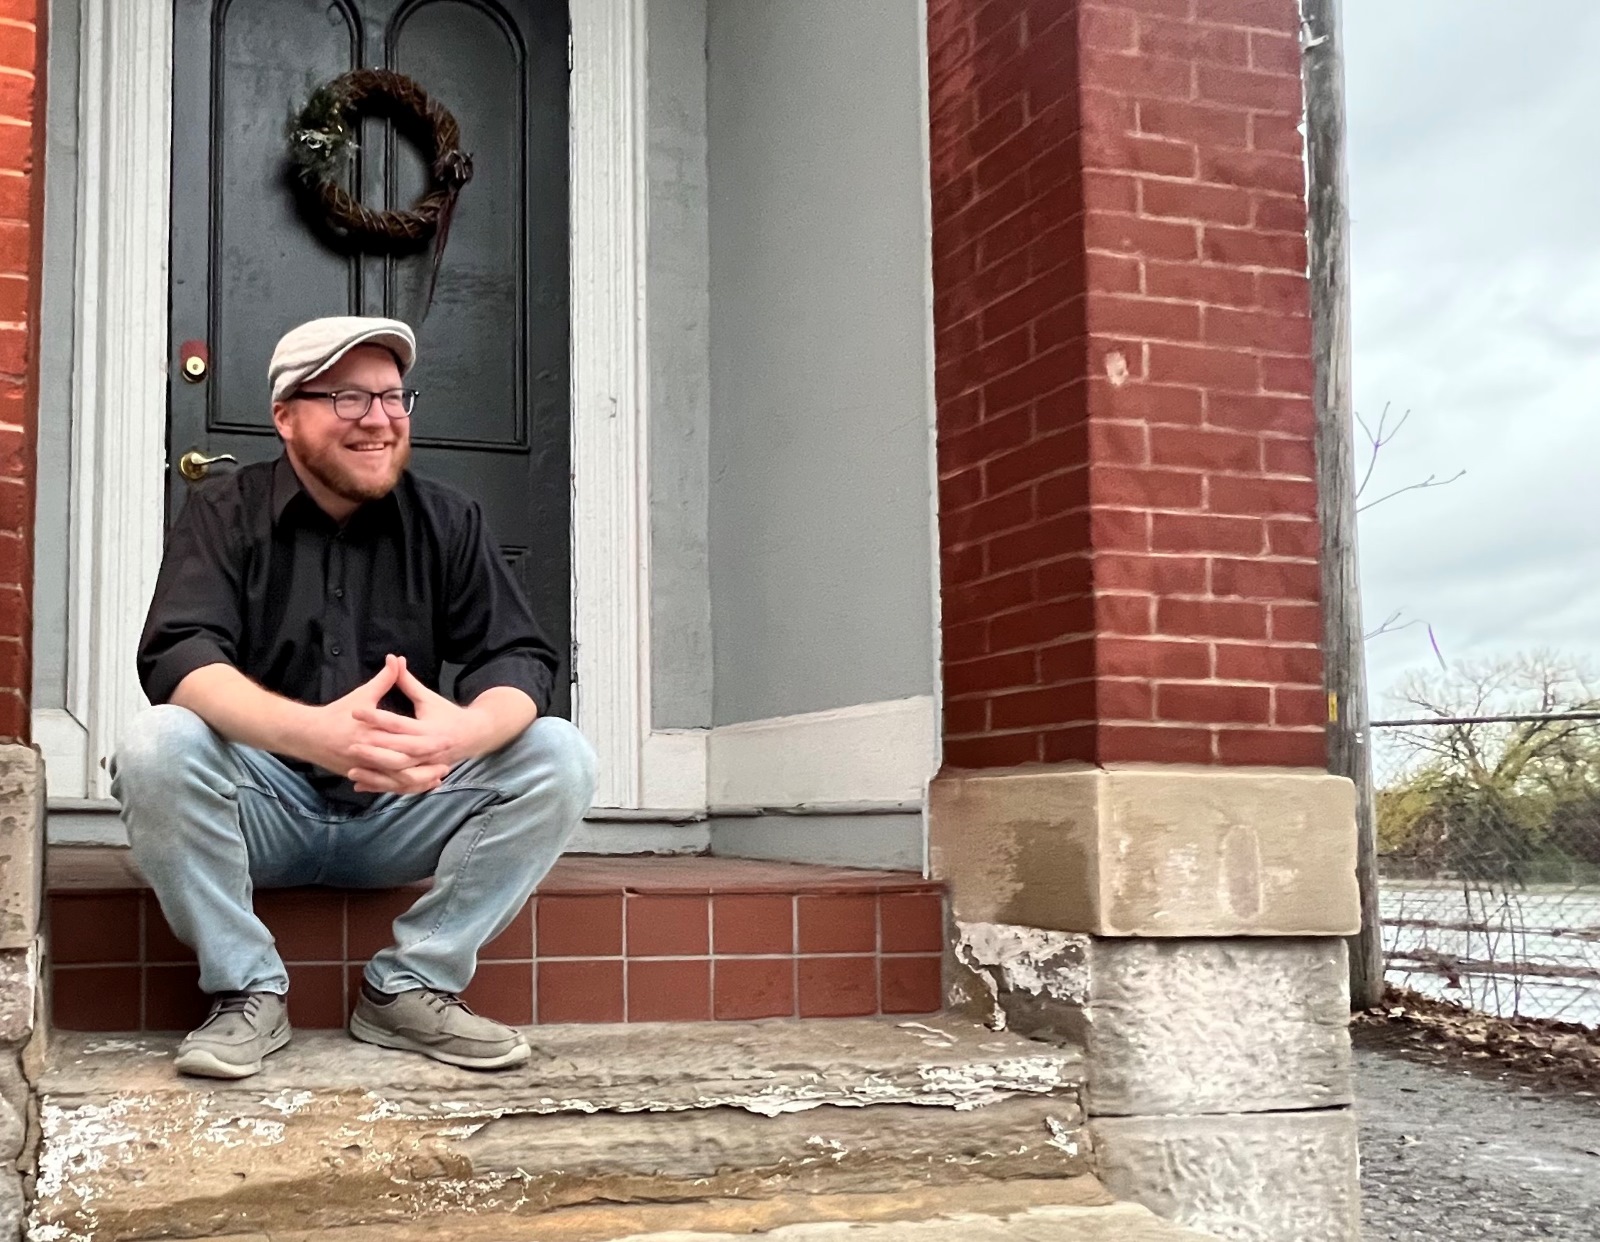 Musician Jimmy Rea, wearing a black button-down shirt and a gray hit, sits on the stoop outside a brick building.